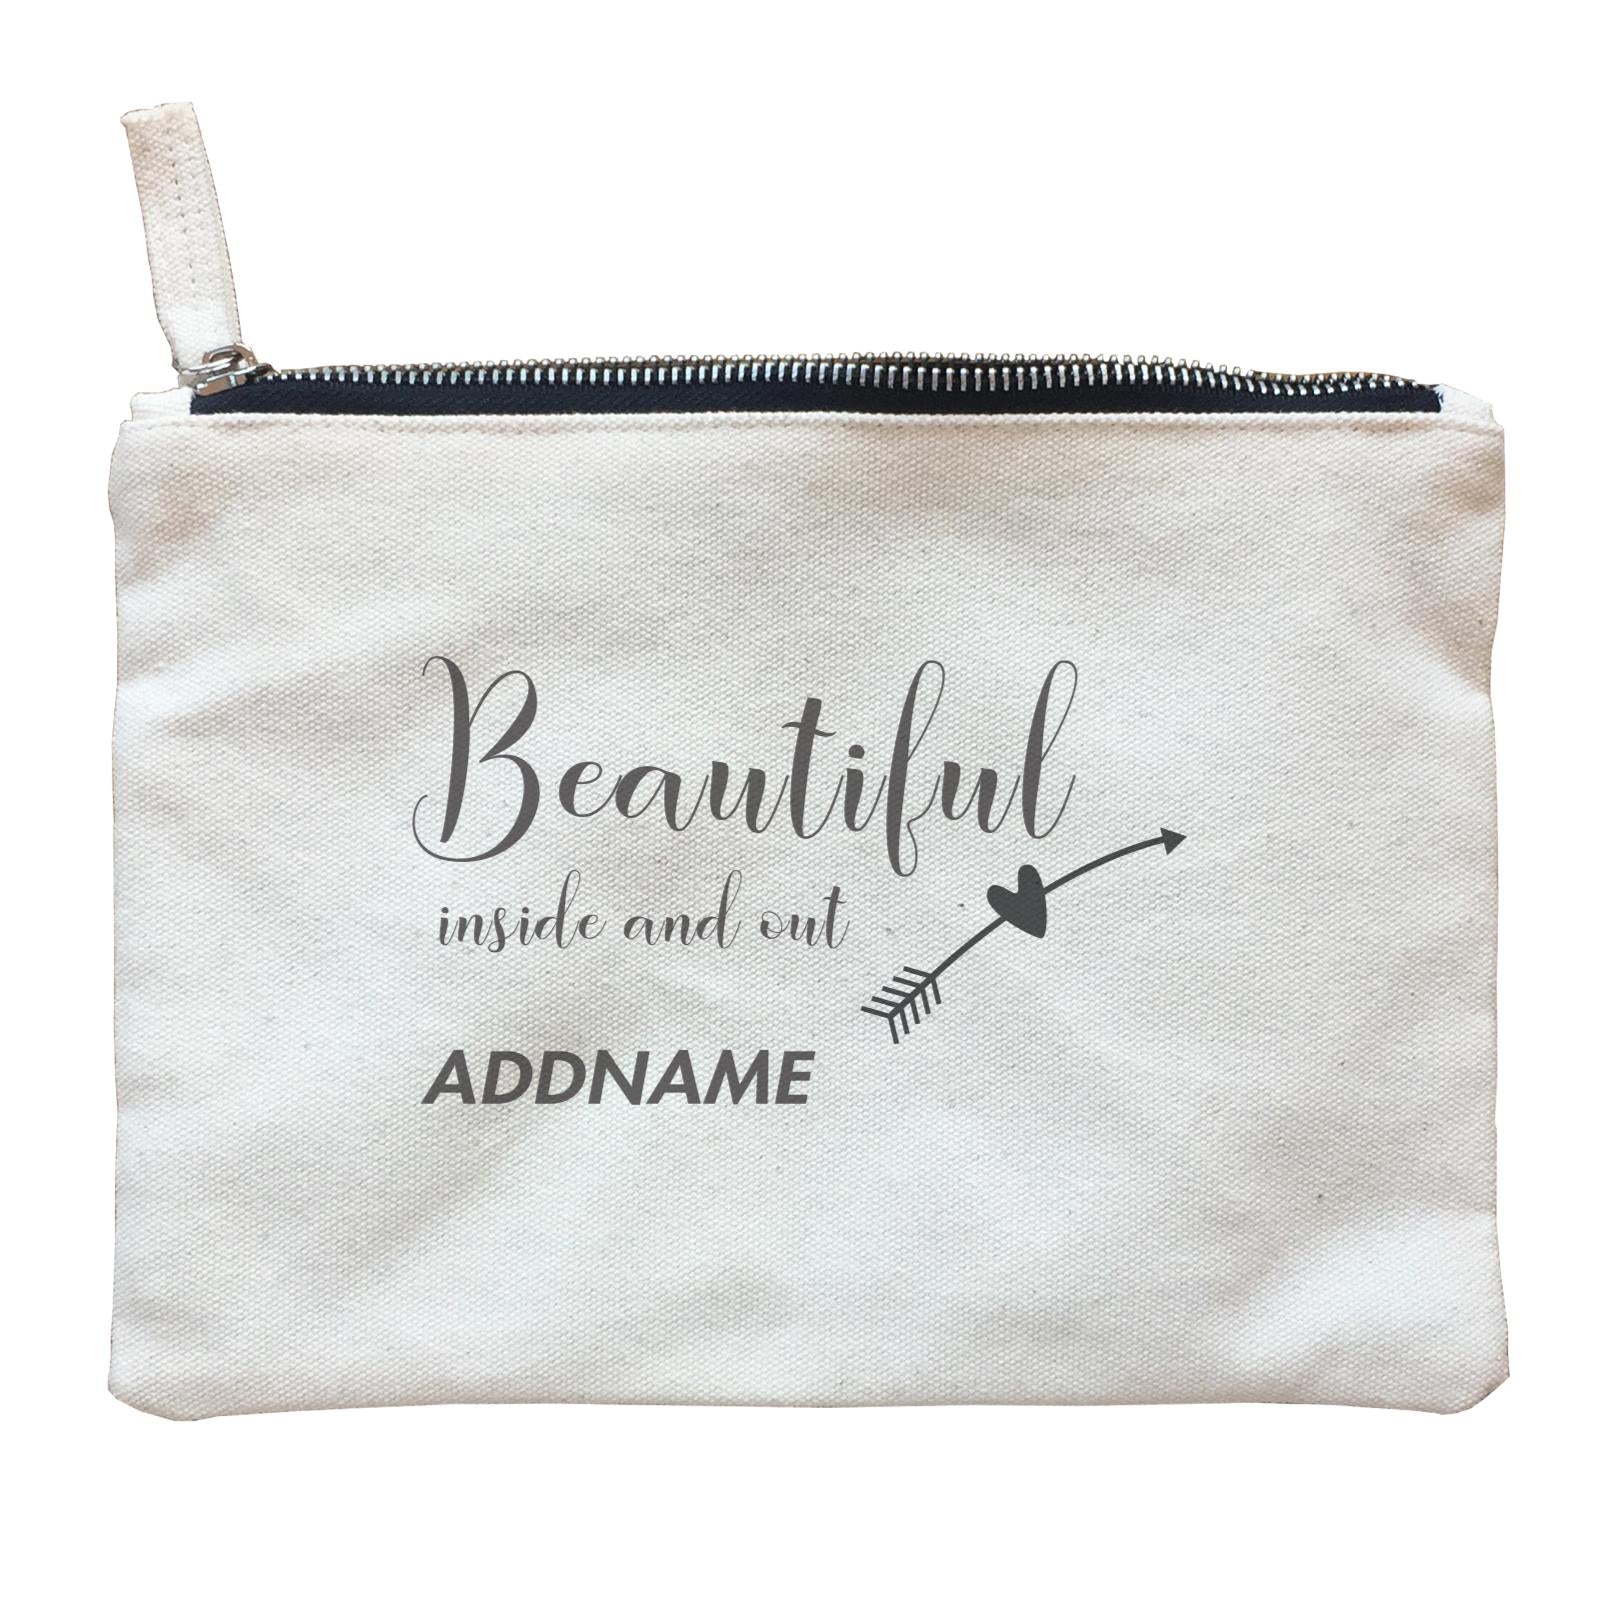 Make Up Quotes Beautiful Inside And Out Addname Zipper Pouch